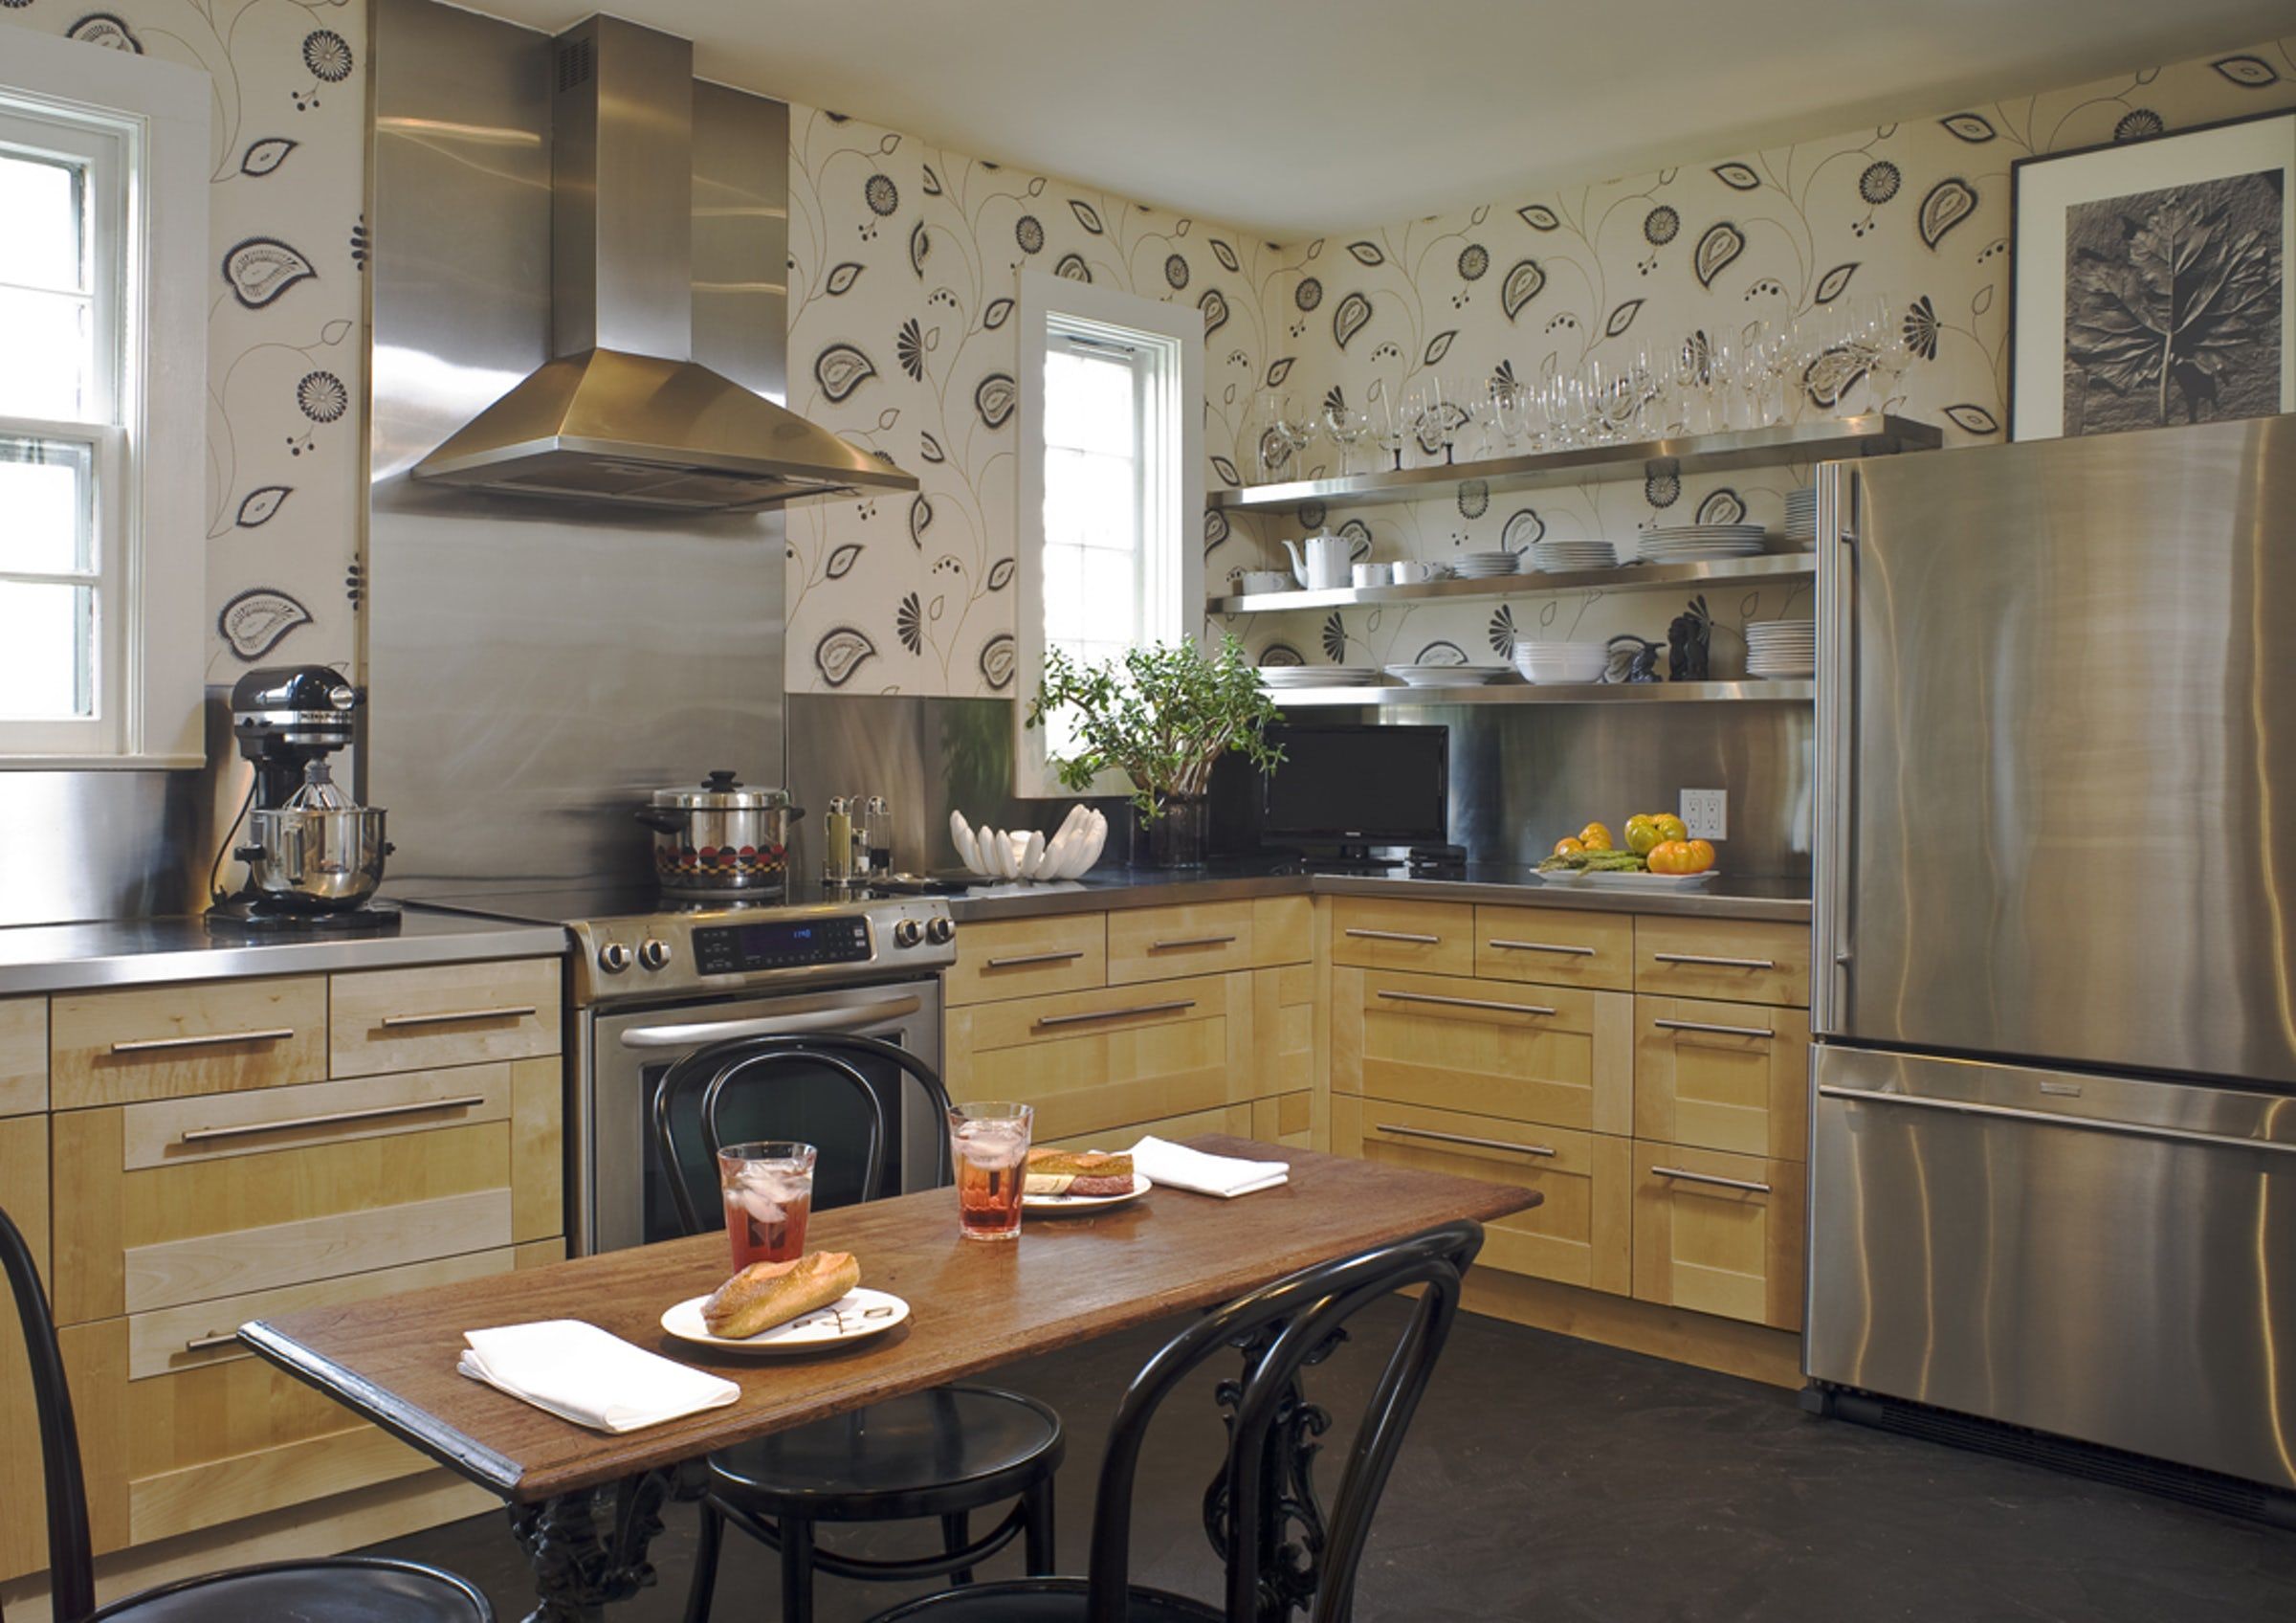 10 Best Kitchen Wallpaper For A Fresh Look | Storables